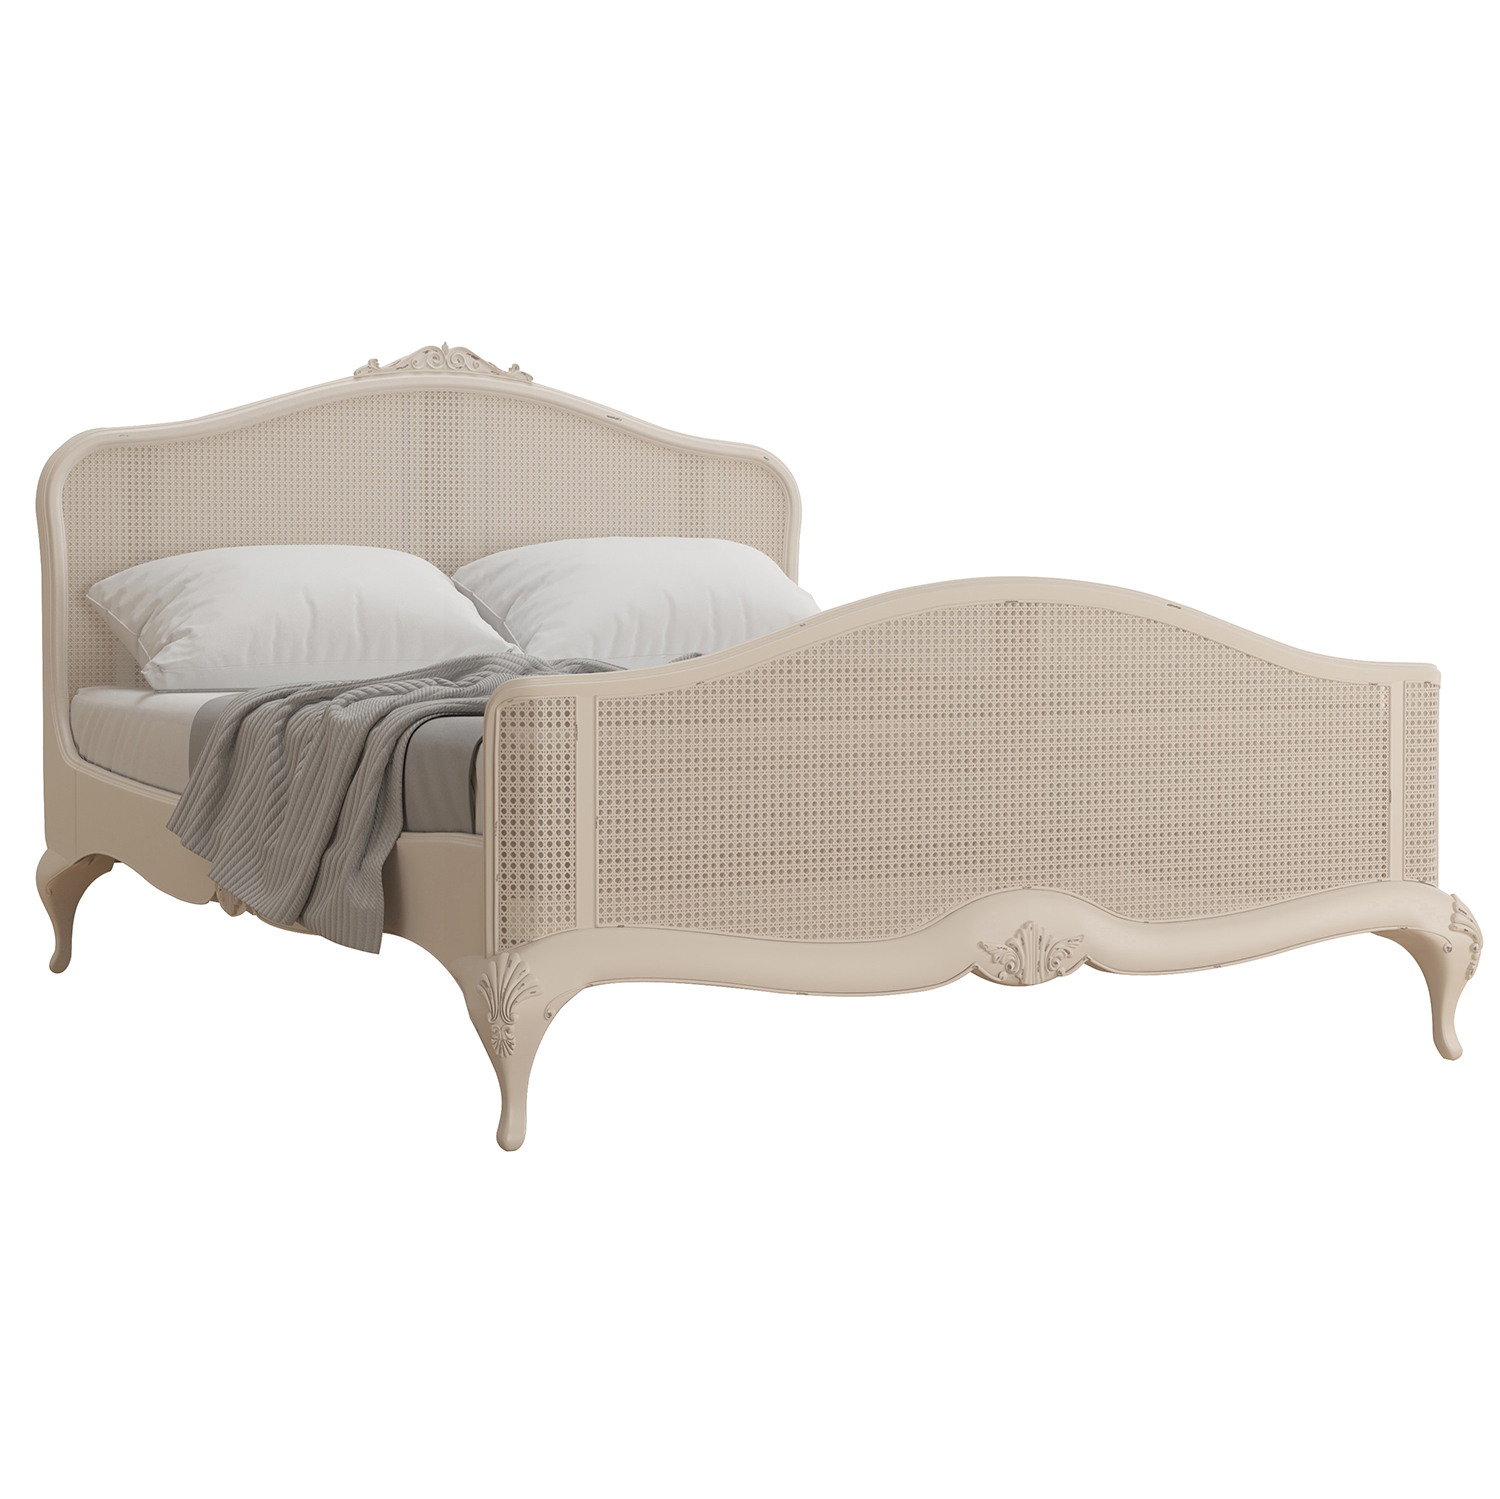 Willis Gambier Ivory 5ft King Size, Ivory King Bed